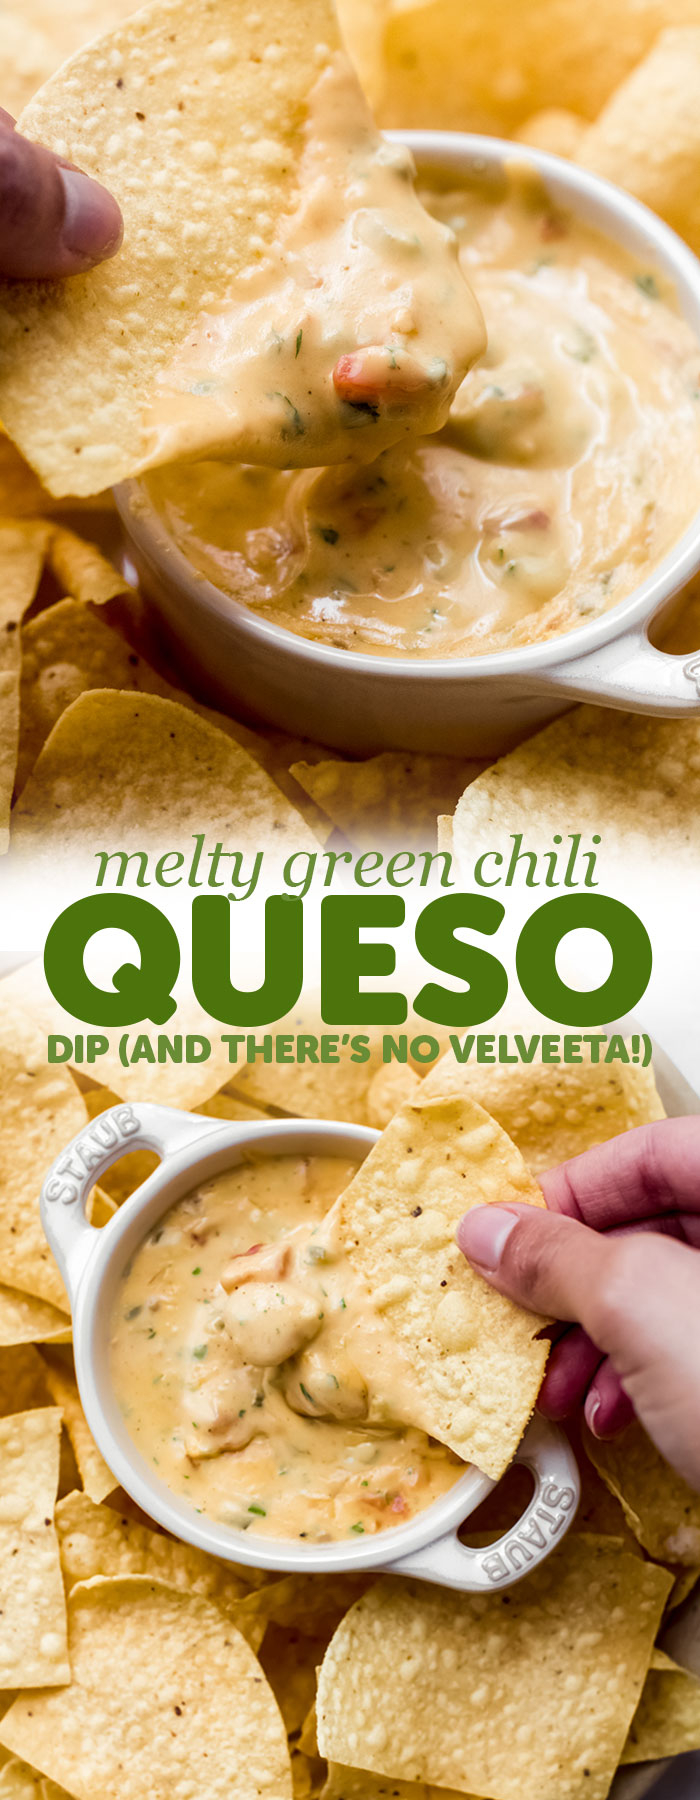 Texas Green Chili Queso Dip - Learn how to make the BEST queso dip. Tastes just like Torchy's if not better! #queso #quesodip #greenchiliquesodip #torchysquesorecipe #superbowlrecipes | Littlespicejar.com